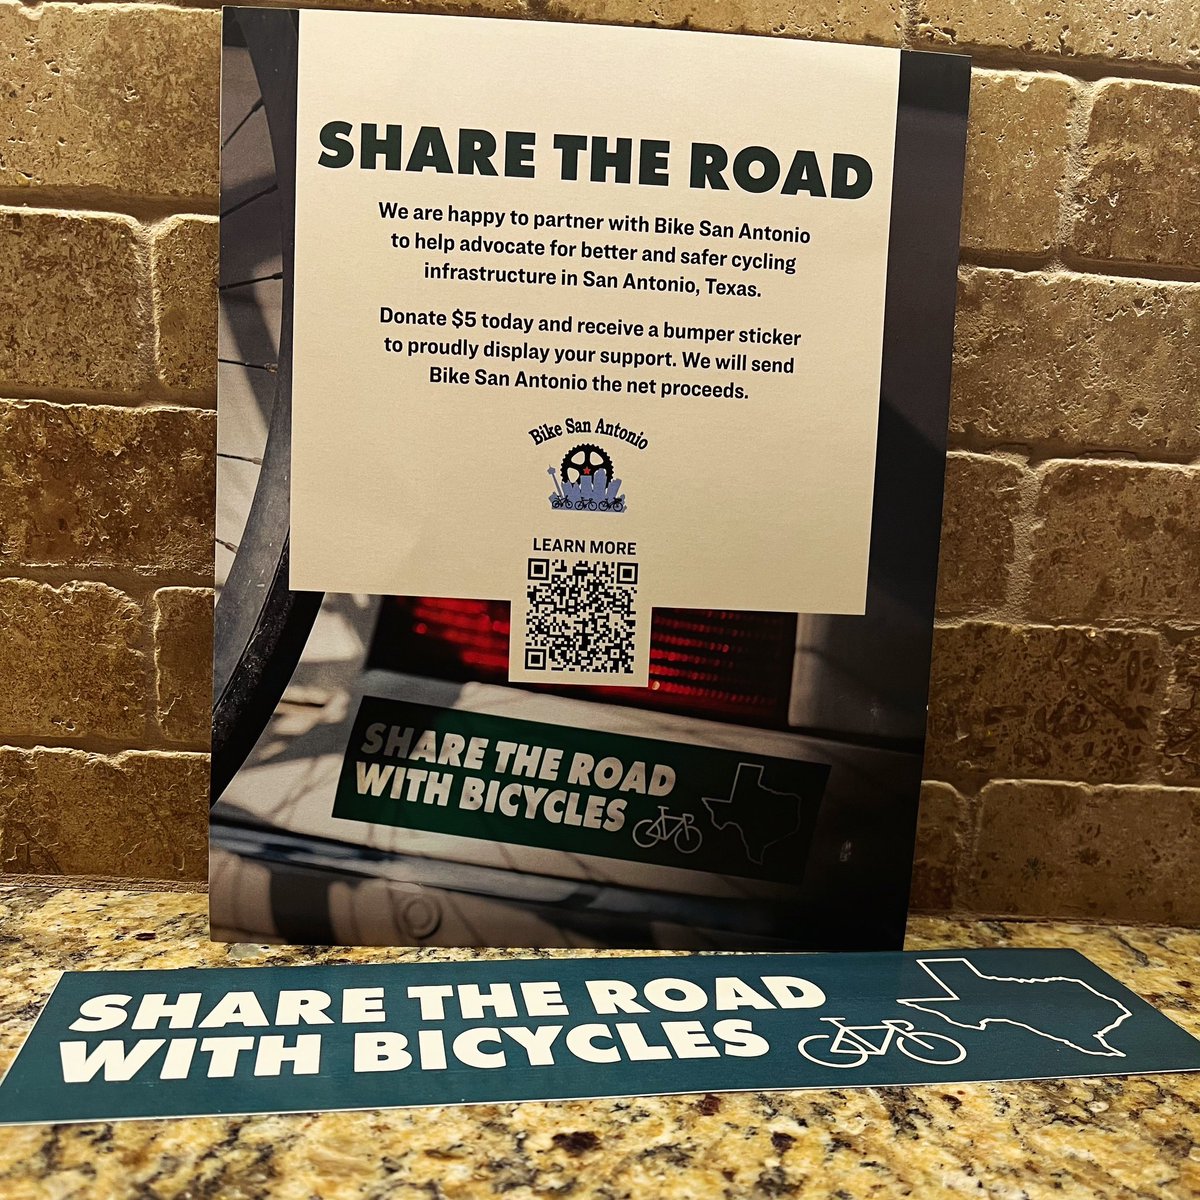 This Bike Month, we are partnering with Trek to help spread the message of road safety with a Share The Road bumper sticker!

For a $5 donation, grab your Share The Road bumper sticker today at any @trekrideclubsatx location. #bikemonth #bikesafety #sharetheroad